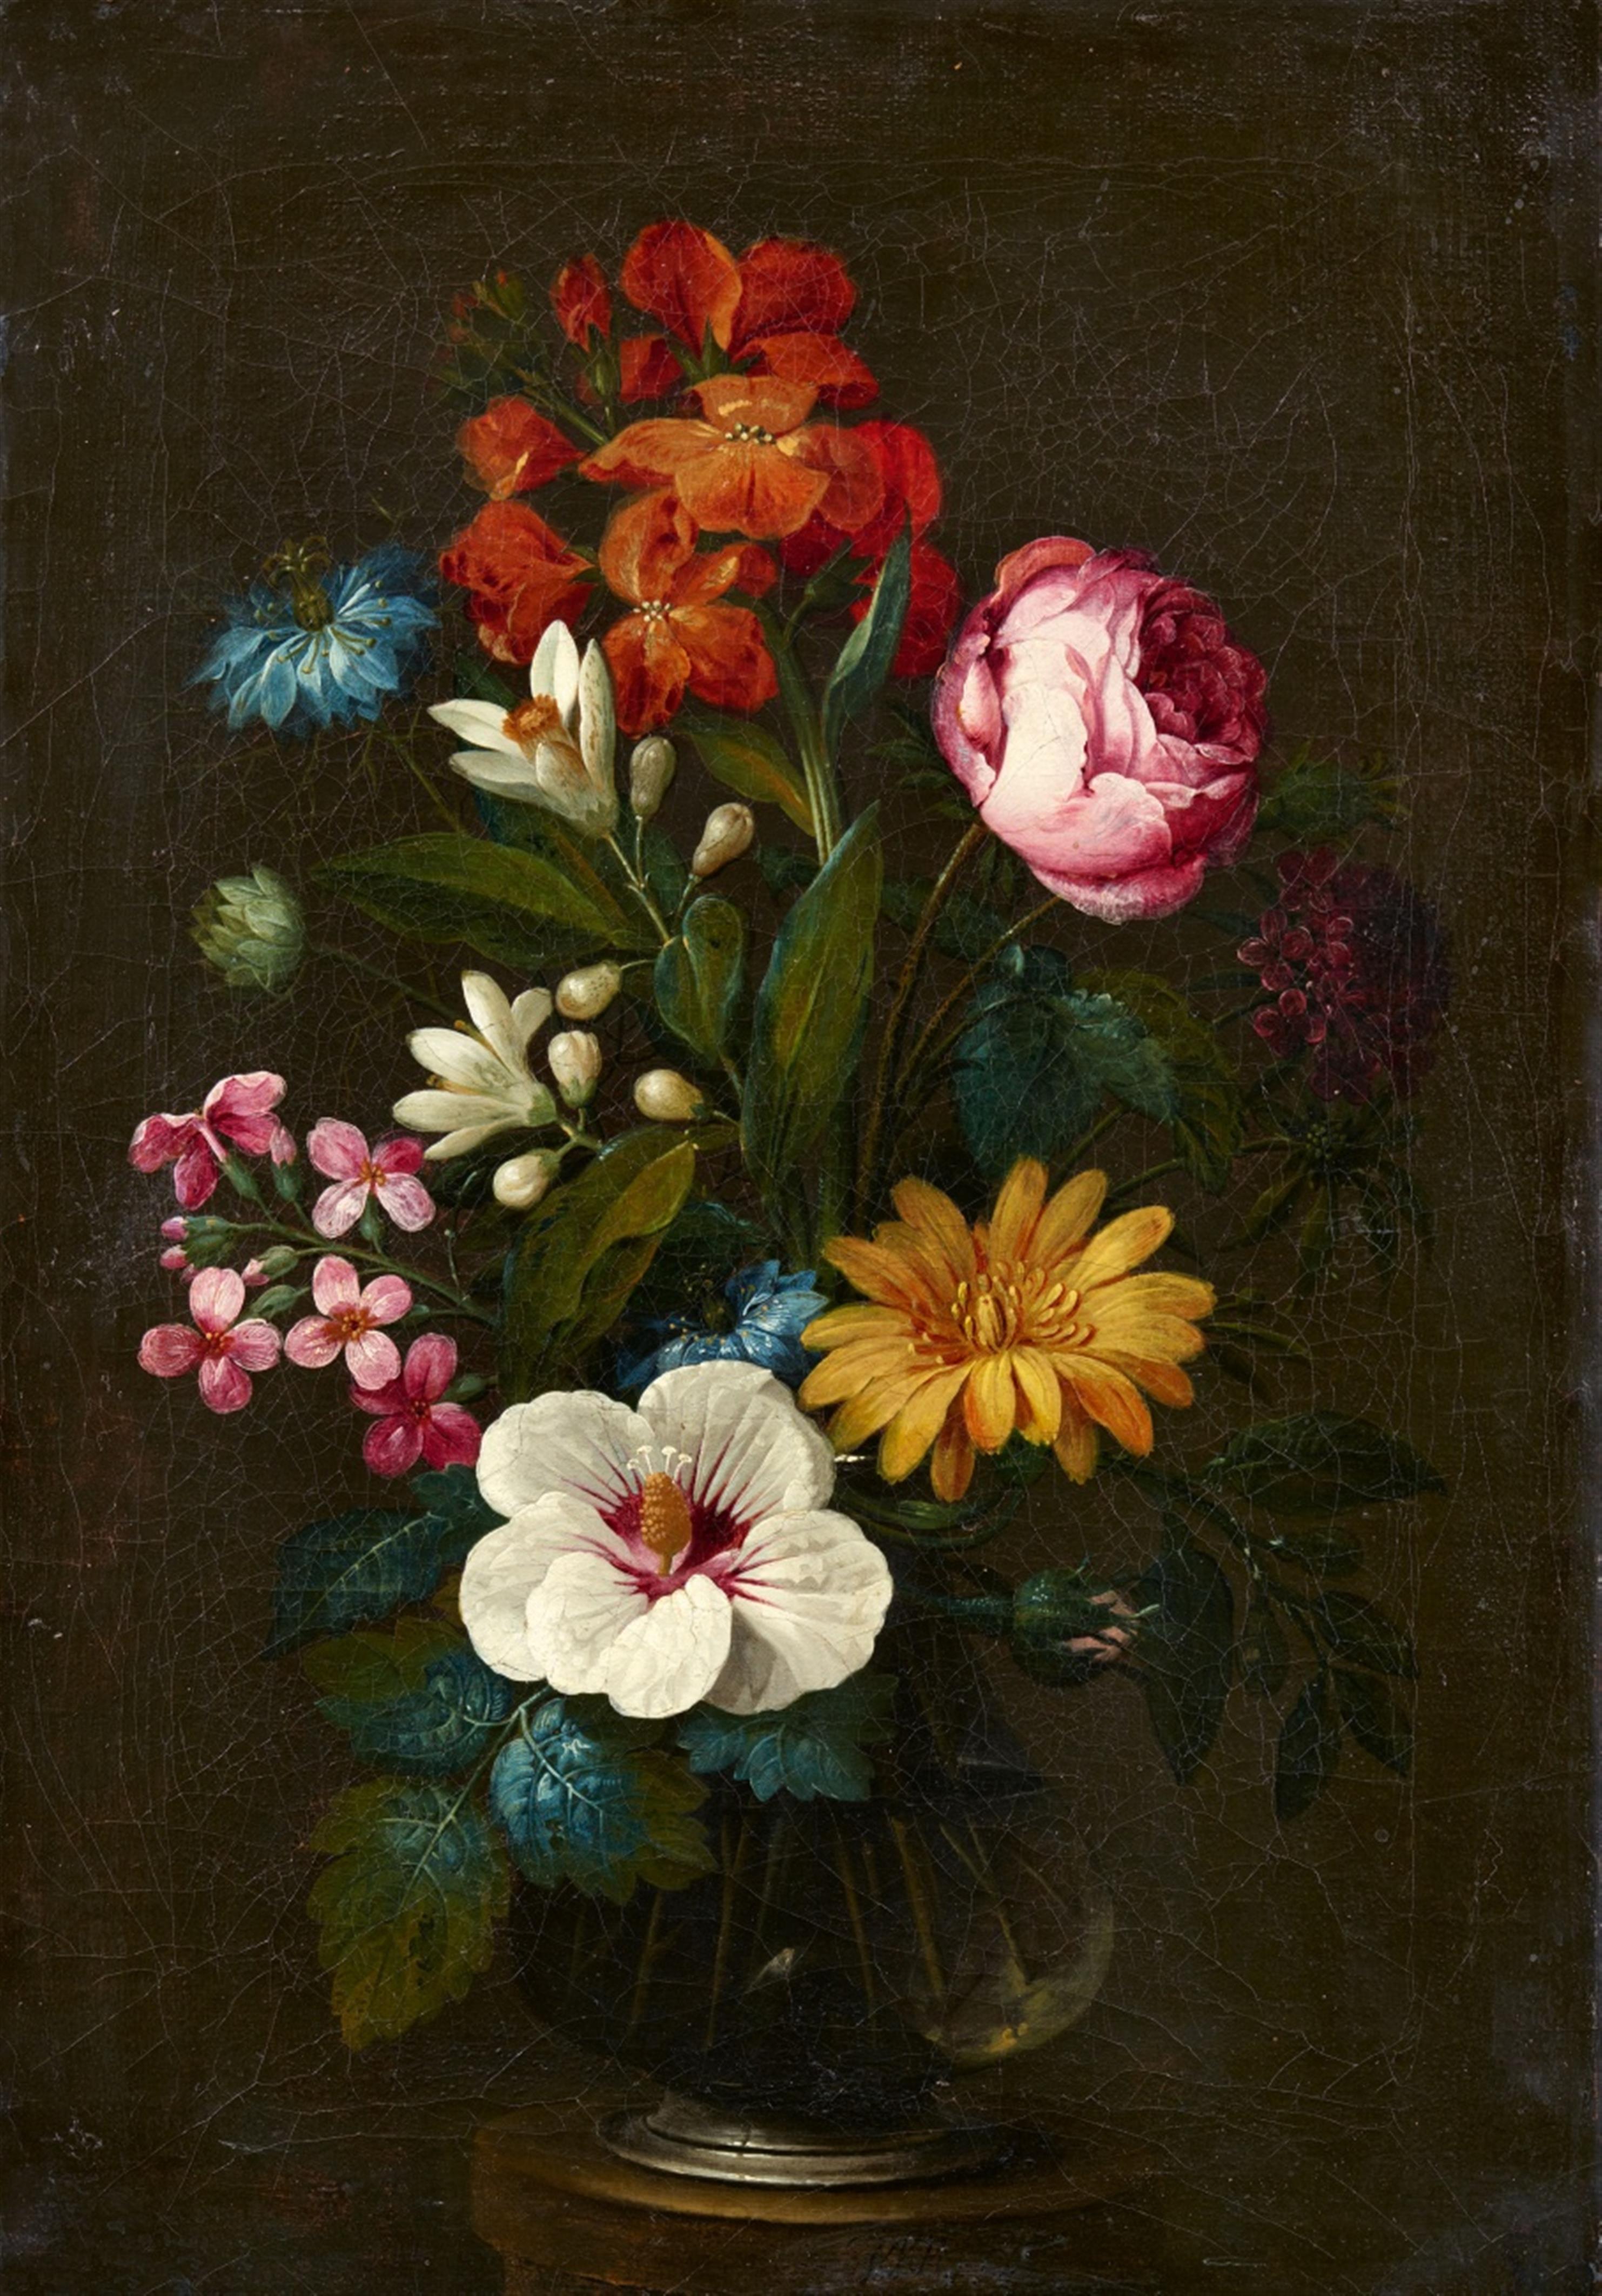 Johann Nepomuk Mayrhofer - Flower Still Life with Roses, Mallows, and Gerberas - image-1